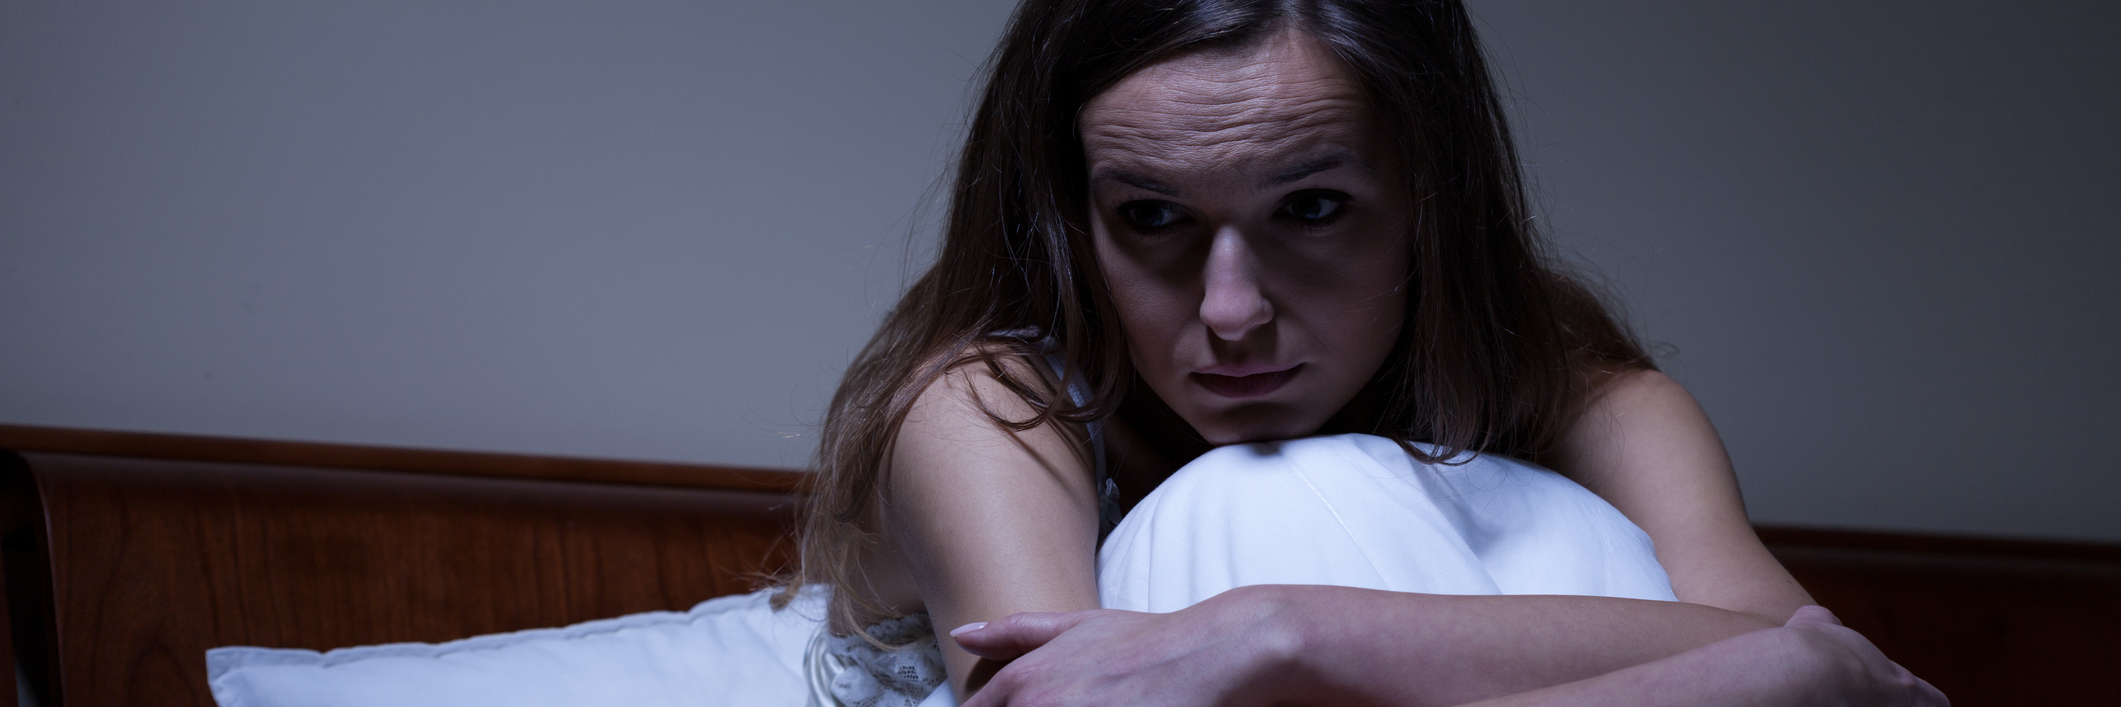 woman sitting in bed at night